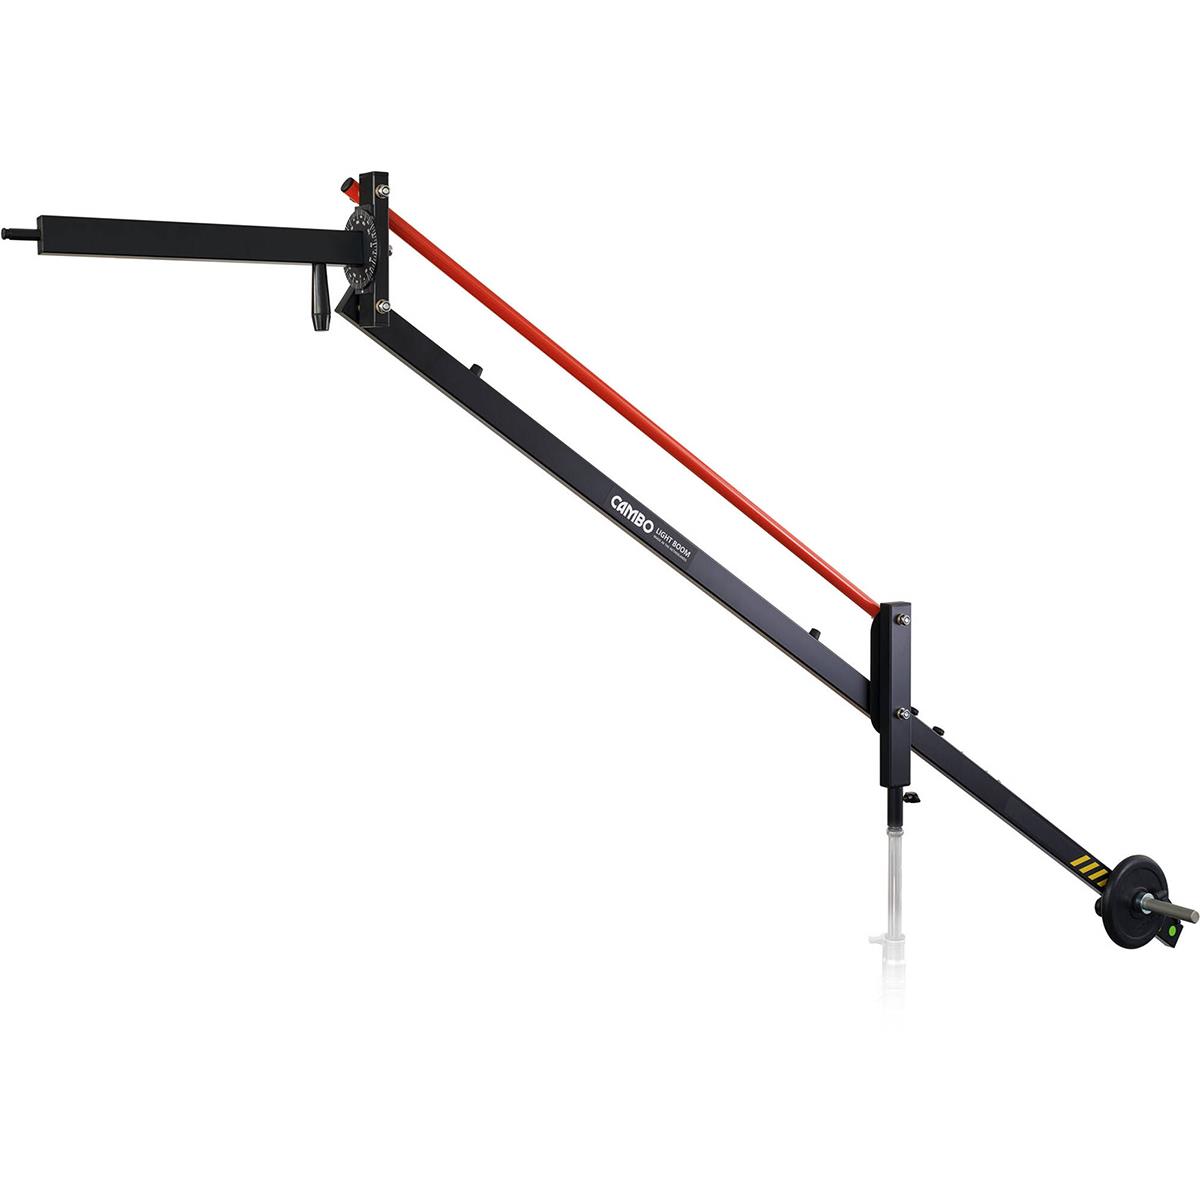 Image of Cambo RD-1205 Redwing Standard Boom Arm for Light Fixtures